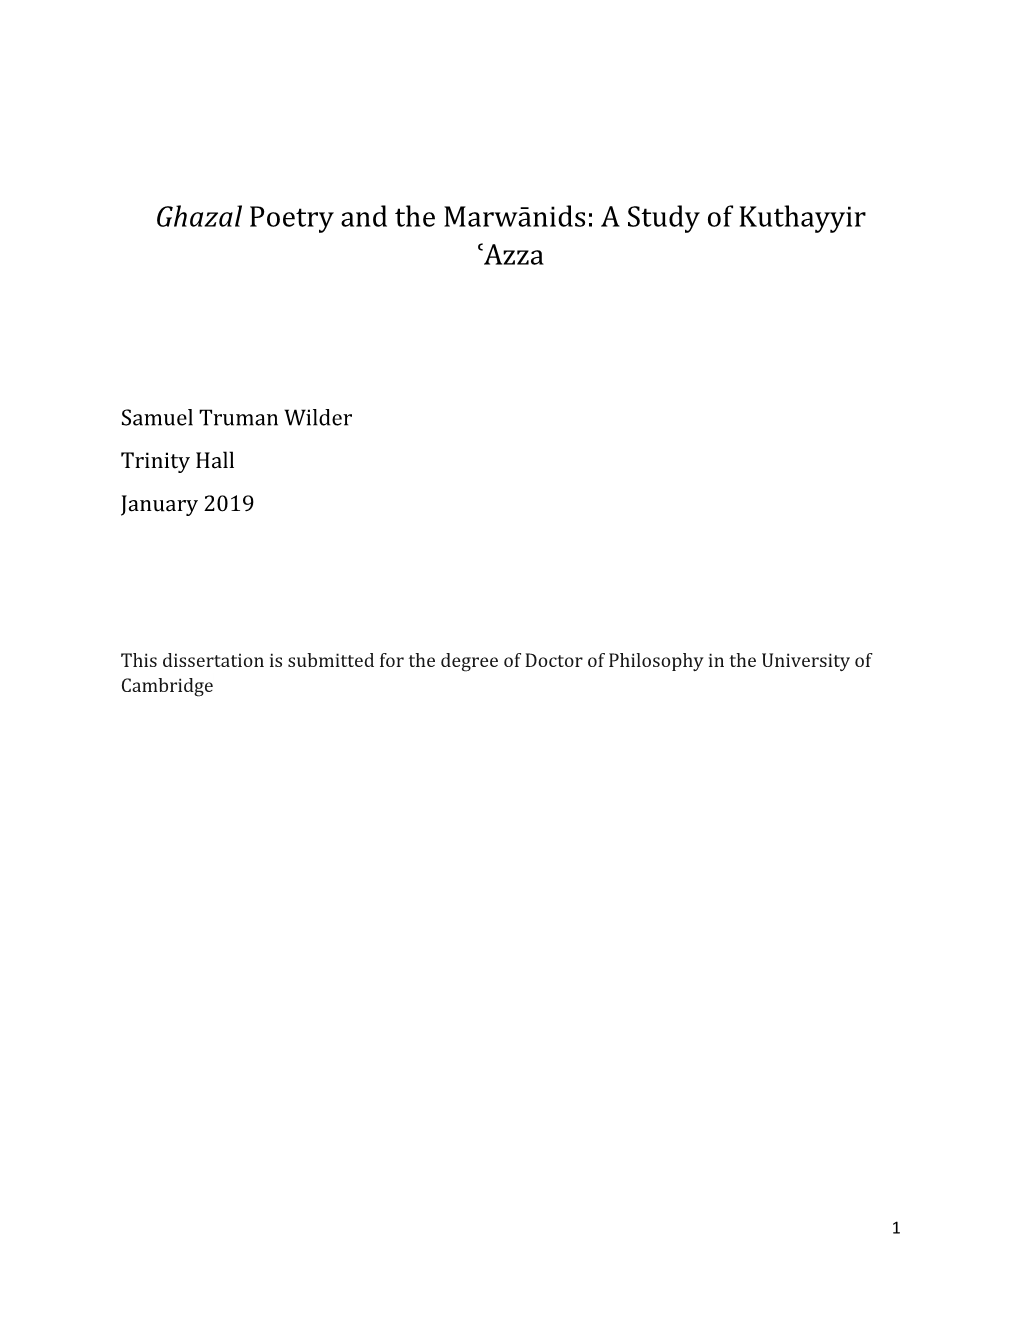 Ghazal Poetry and the Marwānids: a Study of Kuthayyir ʿazza